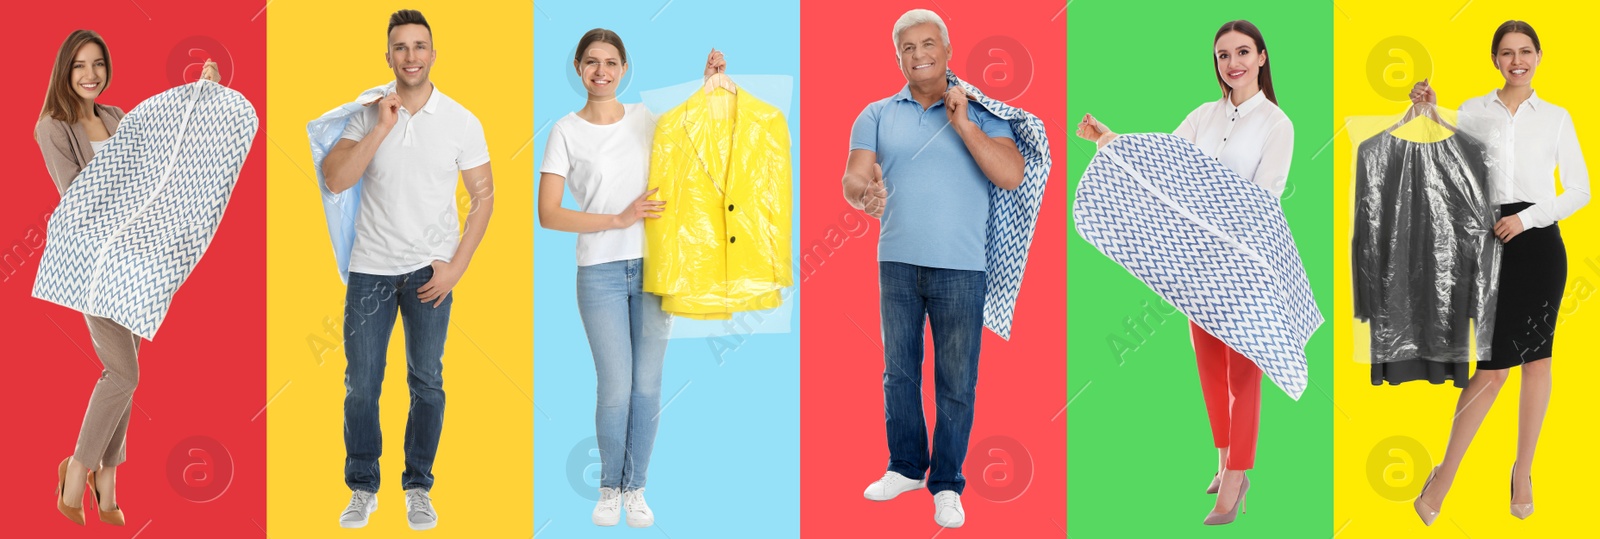 Image of Collage with photos of people holding clothes on different color backgrounds, banner design. Dry-cleaning service